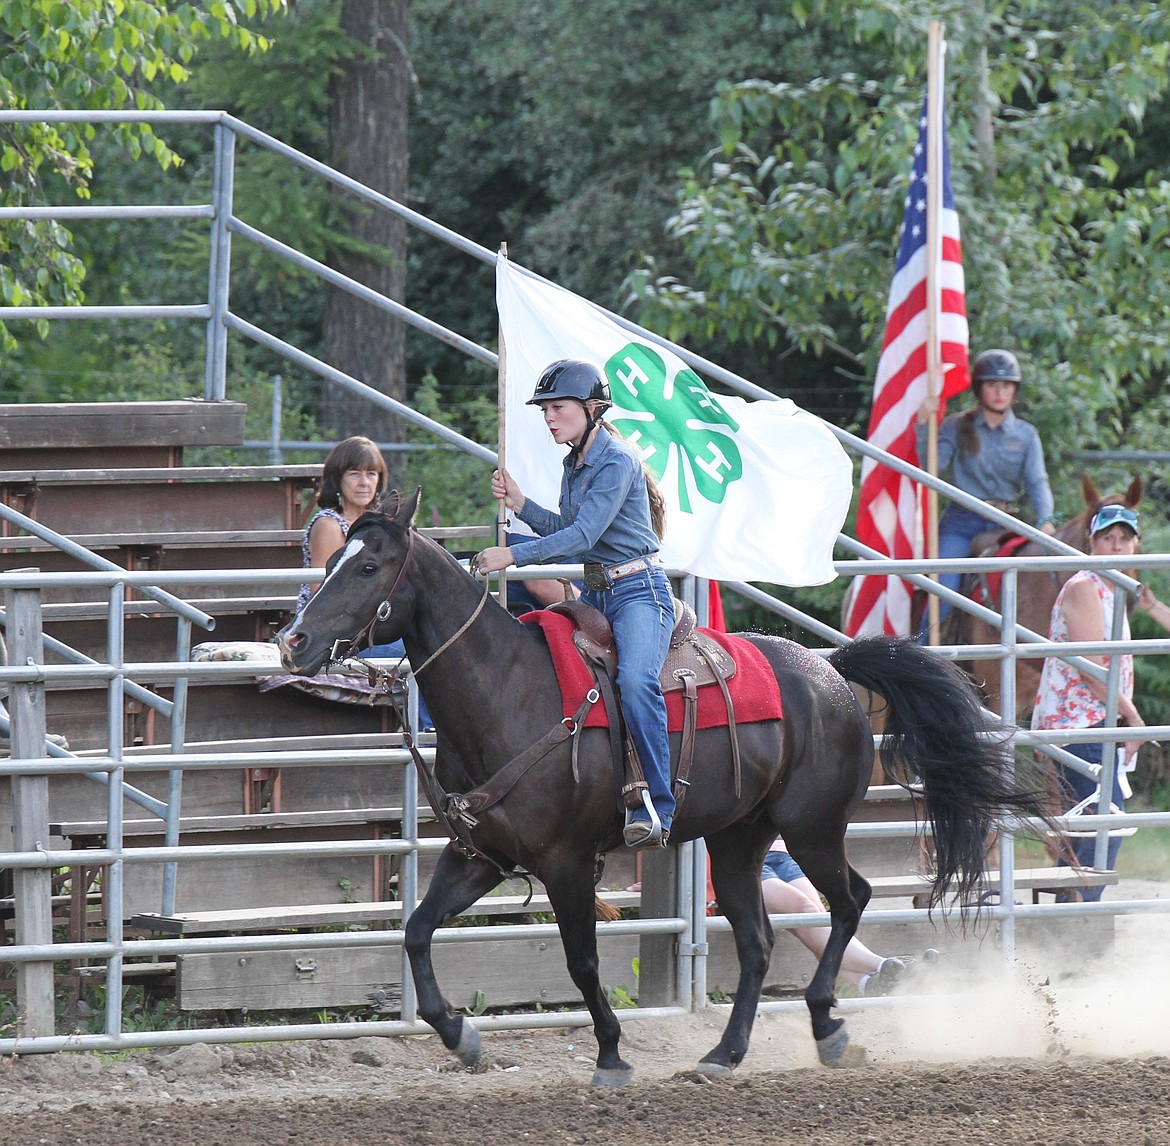 A rider carries the 4-H flag during the opening ceremony of the equestrian event on Friday.